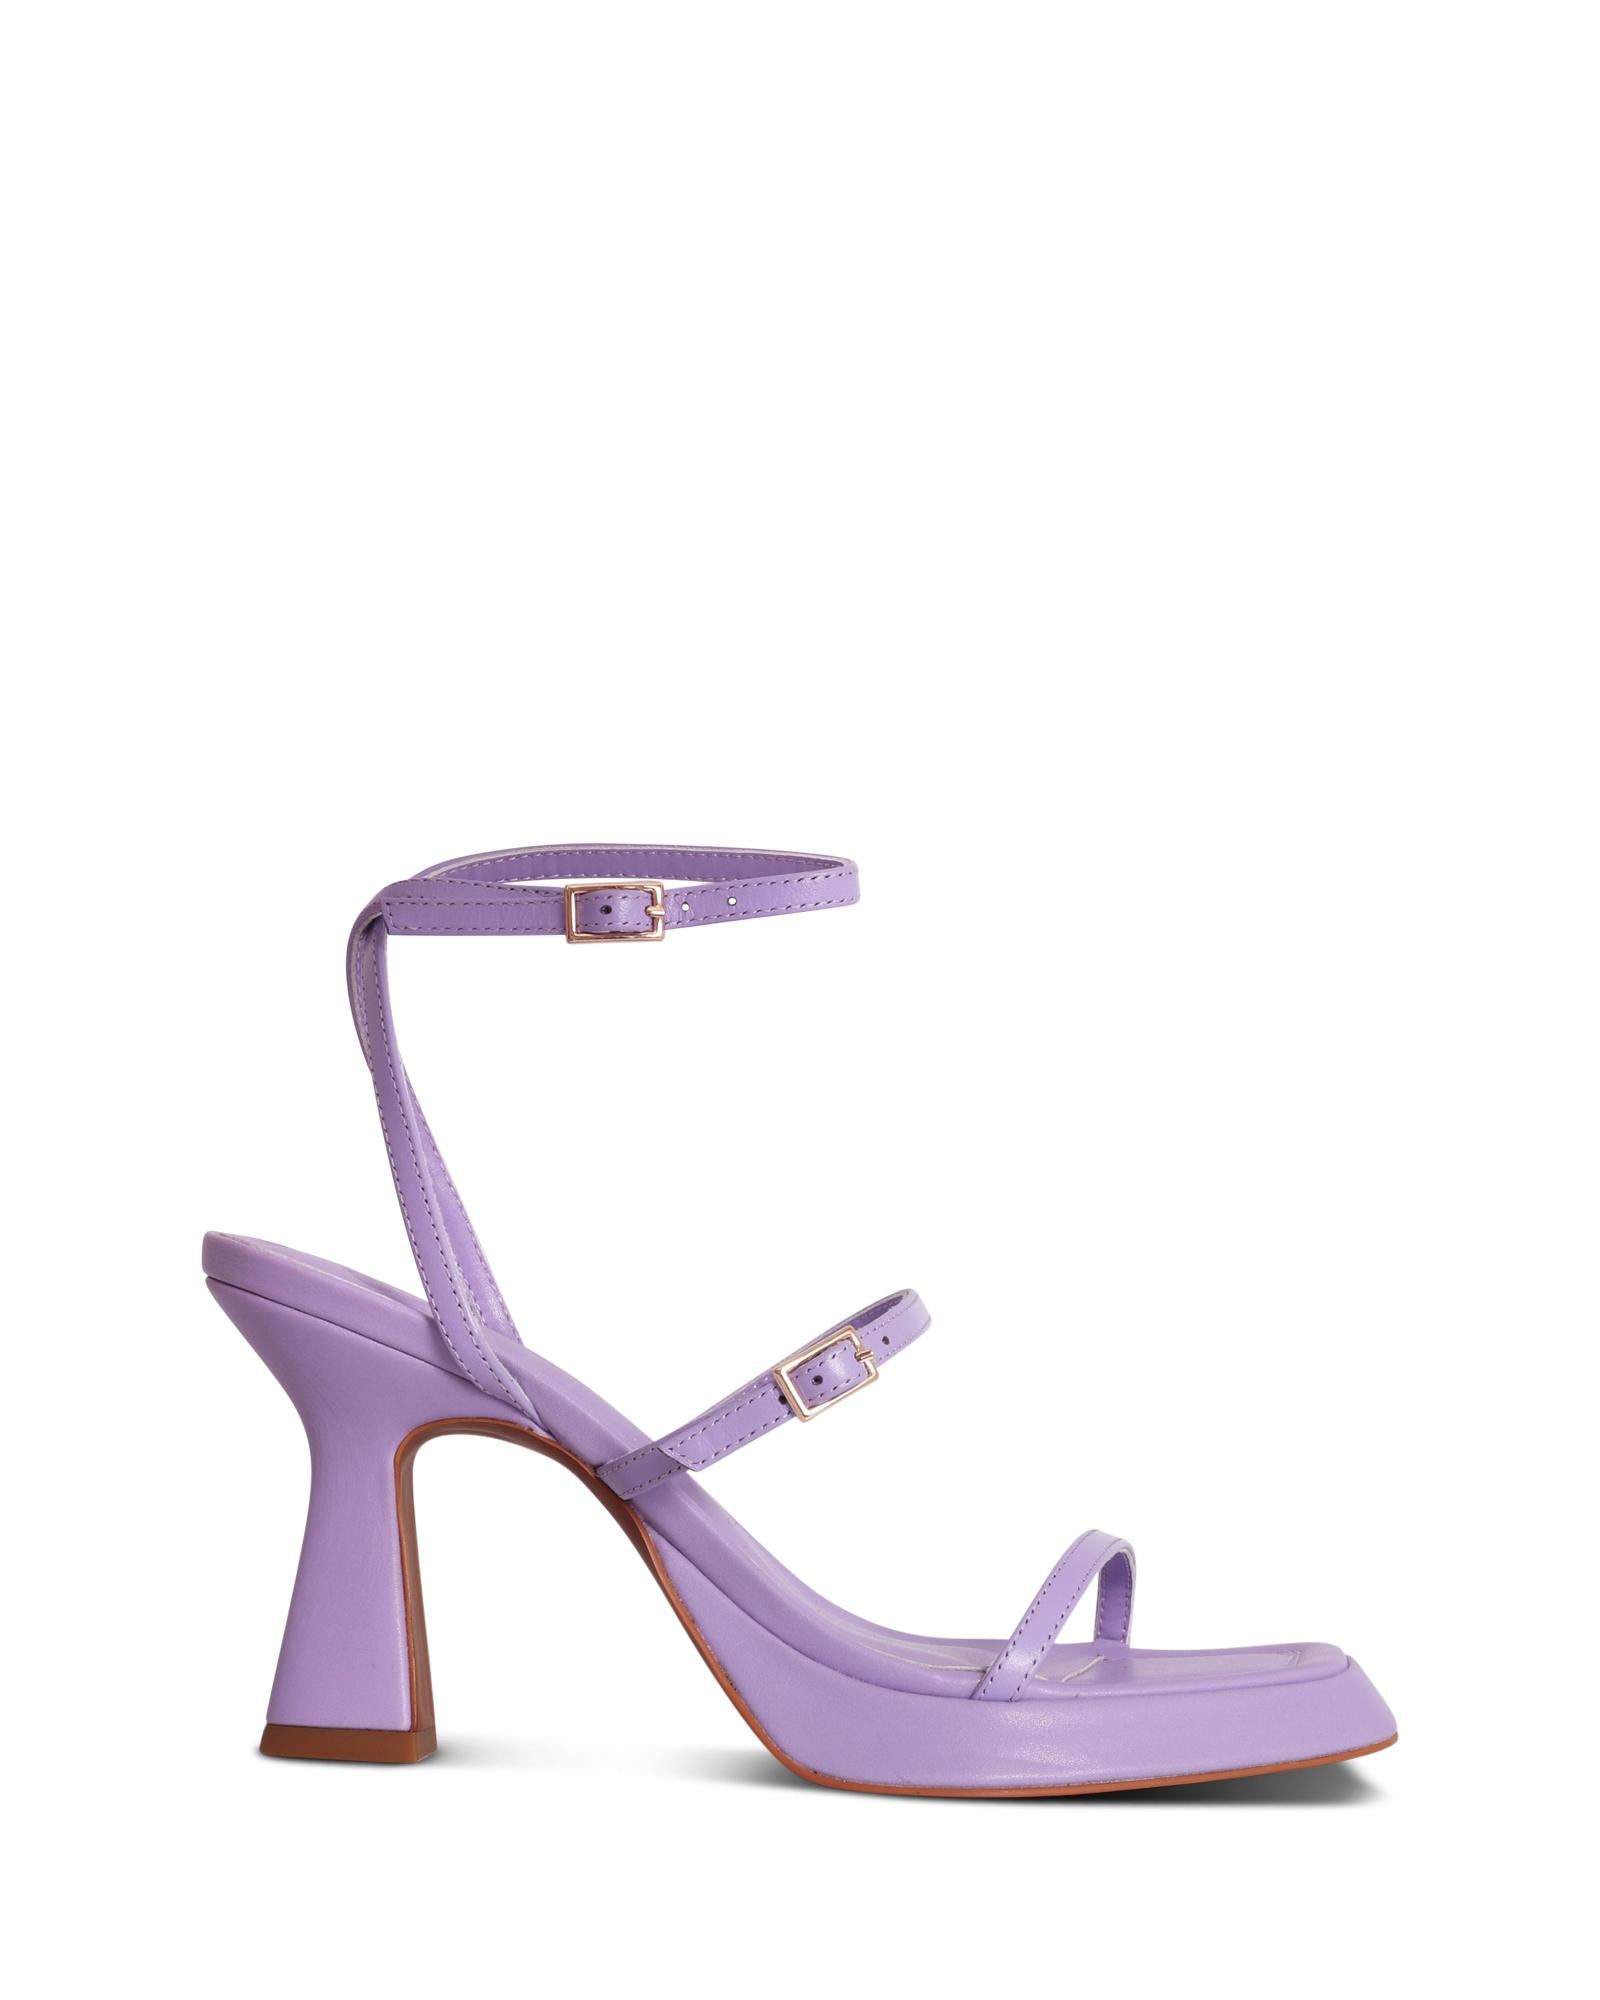 Salerno Lilac 9cm Platform Block Heel with Delicate Straps and Gold Buckles